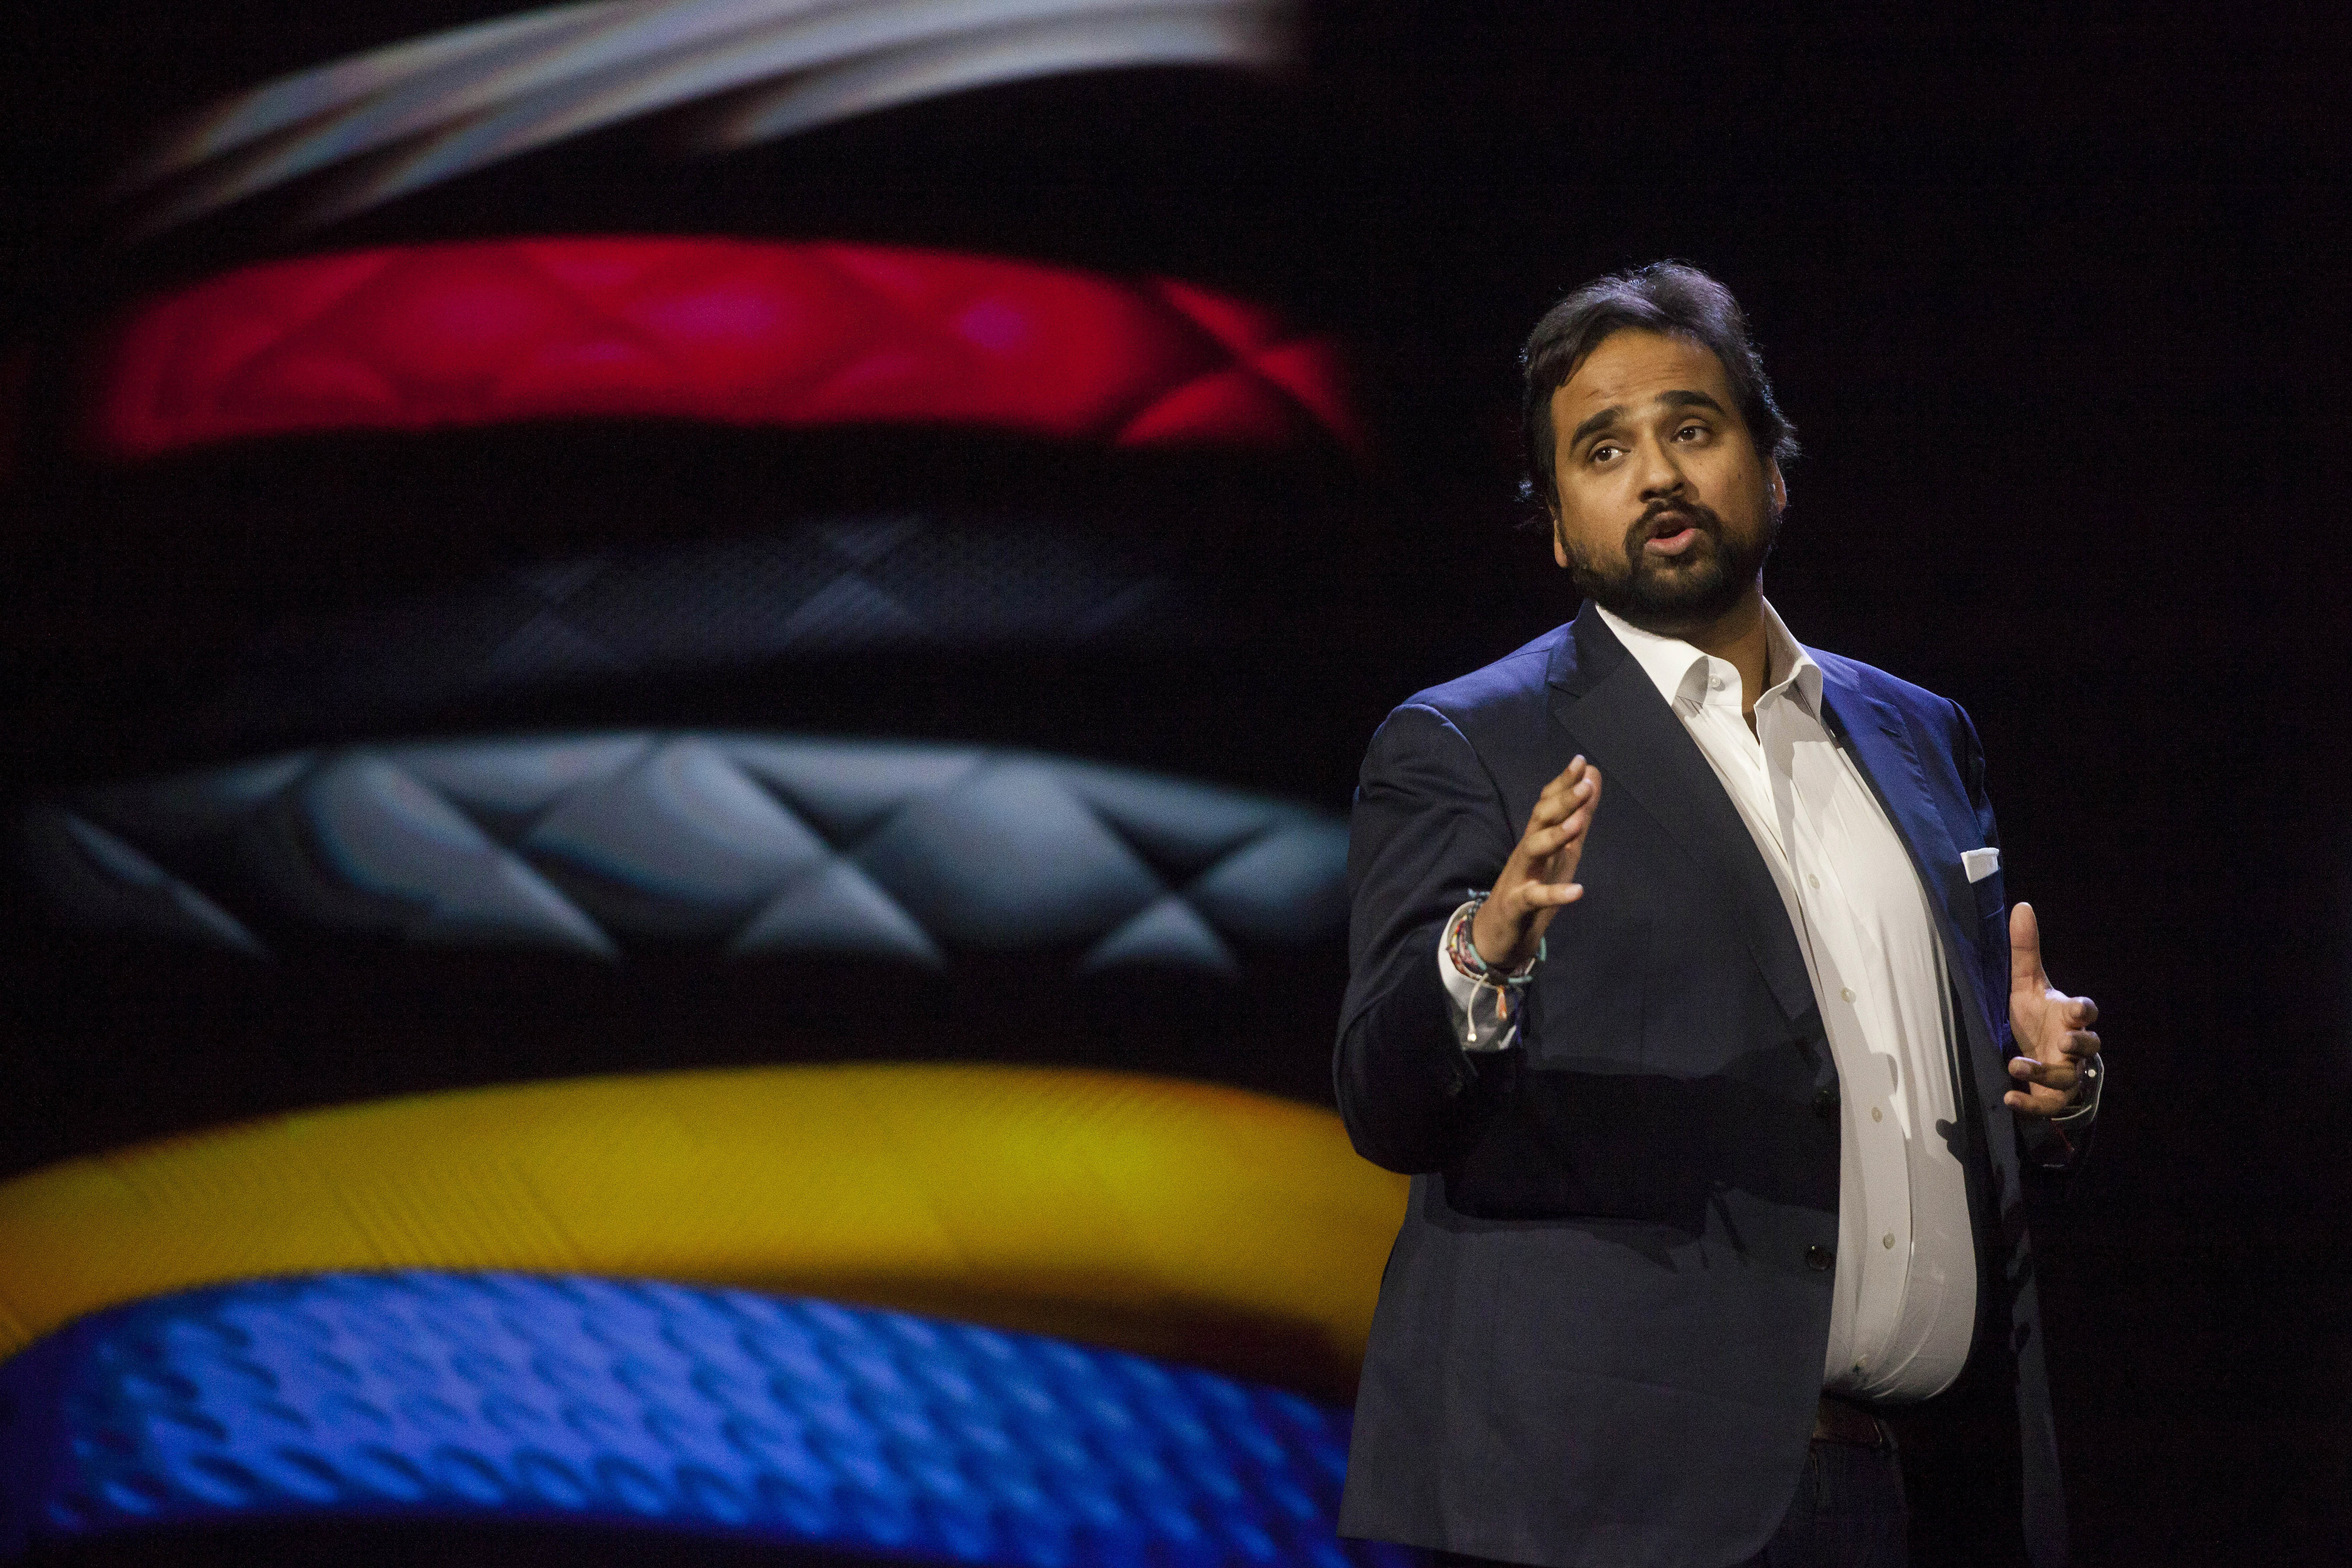 Hosain Rahman, chief executive officer of Jawbone Inc., speaks at a news conference during the 2015 Consumer Electronics Show (CES) in Las Vegas, Nevada, U.S., on Monday, Jan. 5, 2015. (Bloomberg&mdash;Bloomberg via Getty Images)